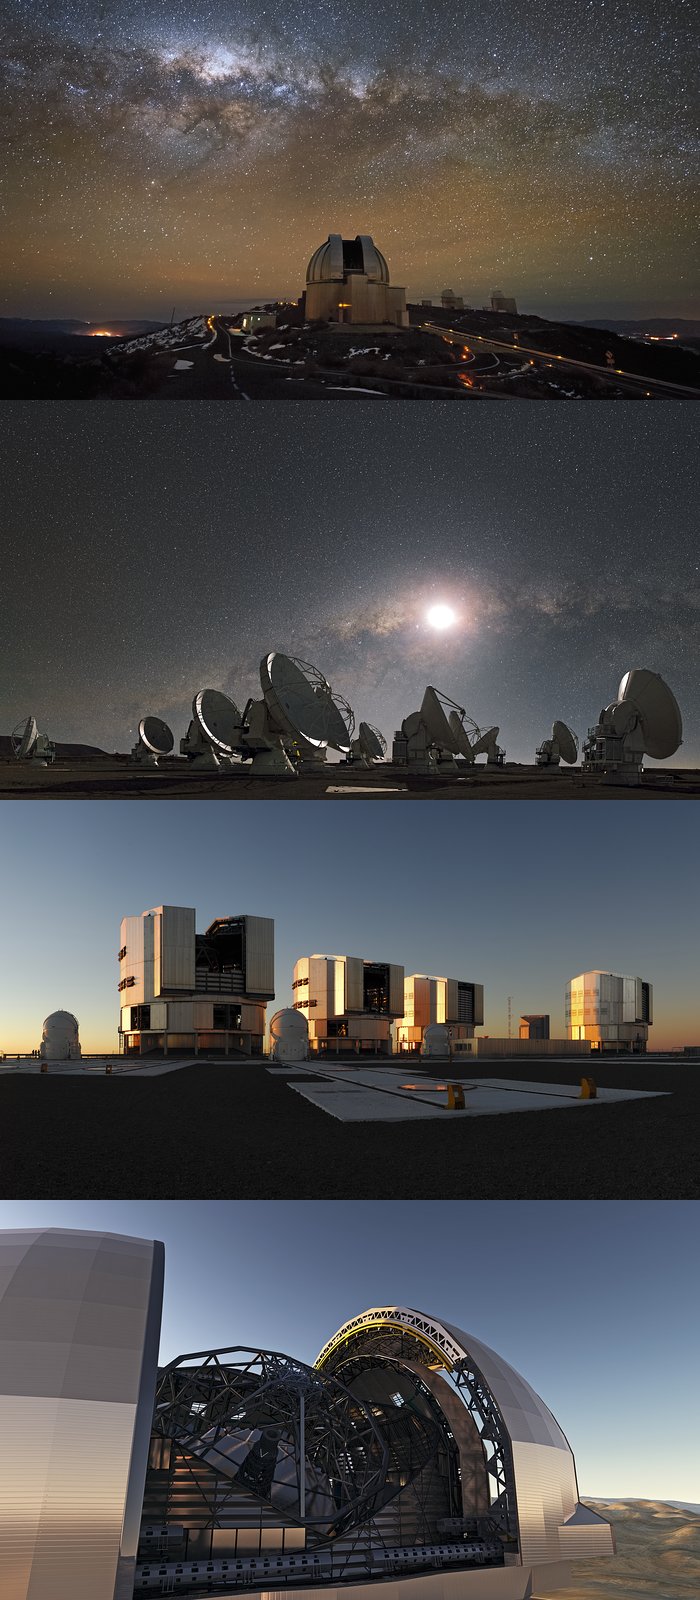 The four ESO observatories